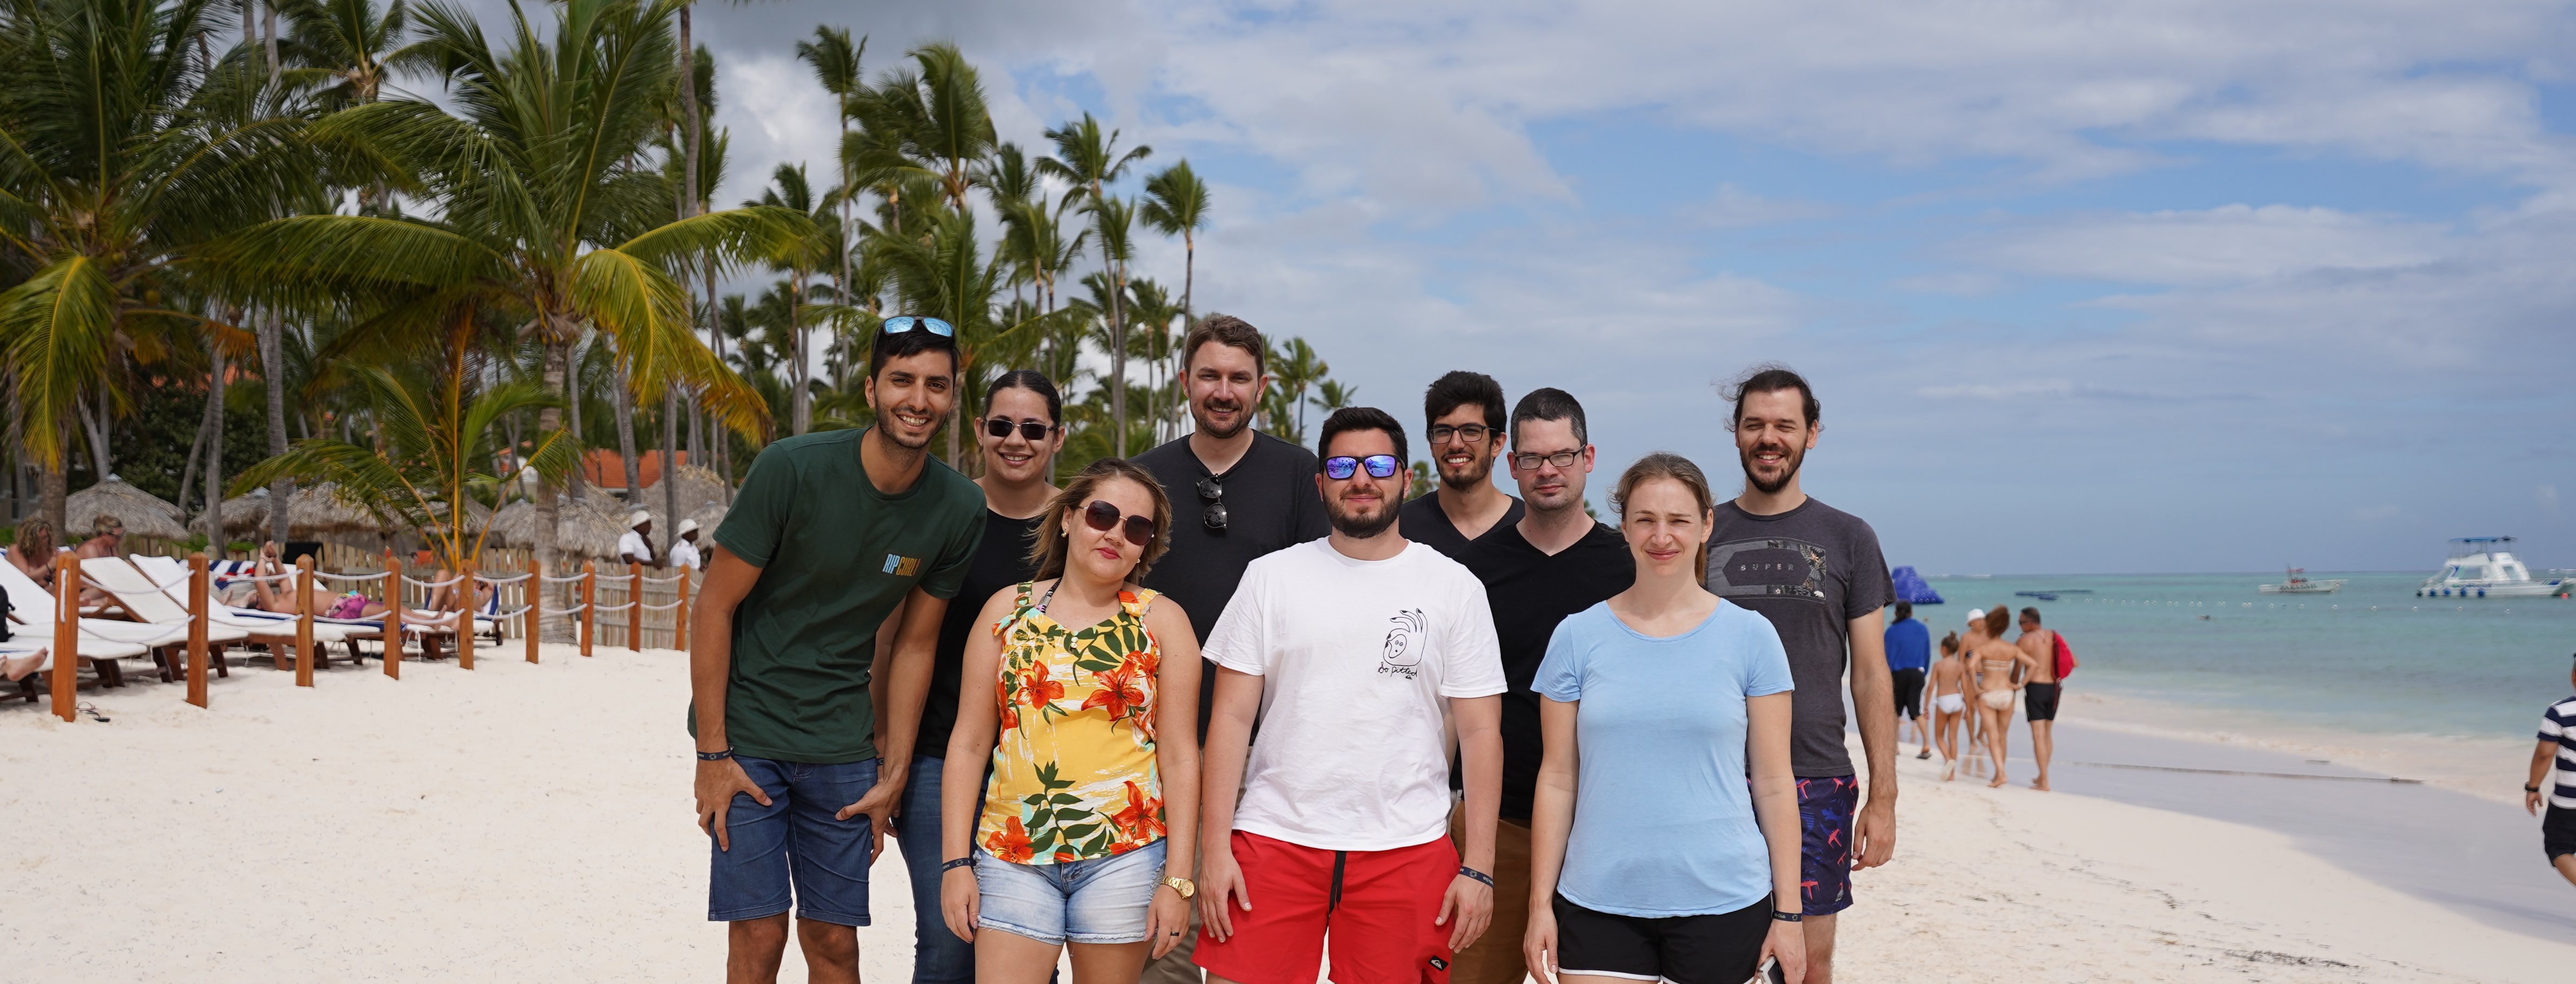 Our team at Punta Cana's team retreat (2020)